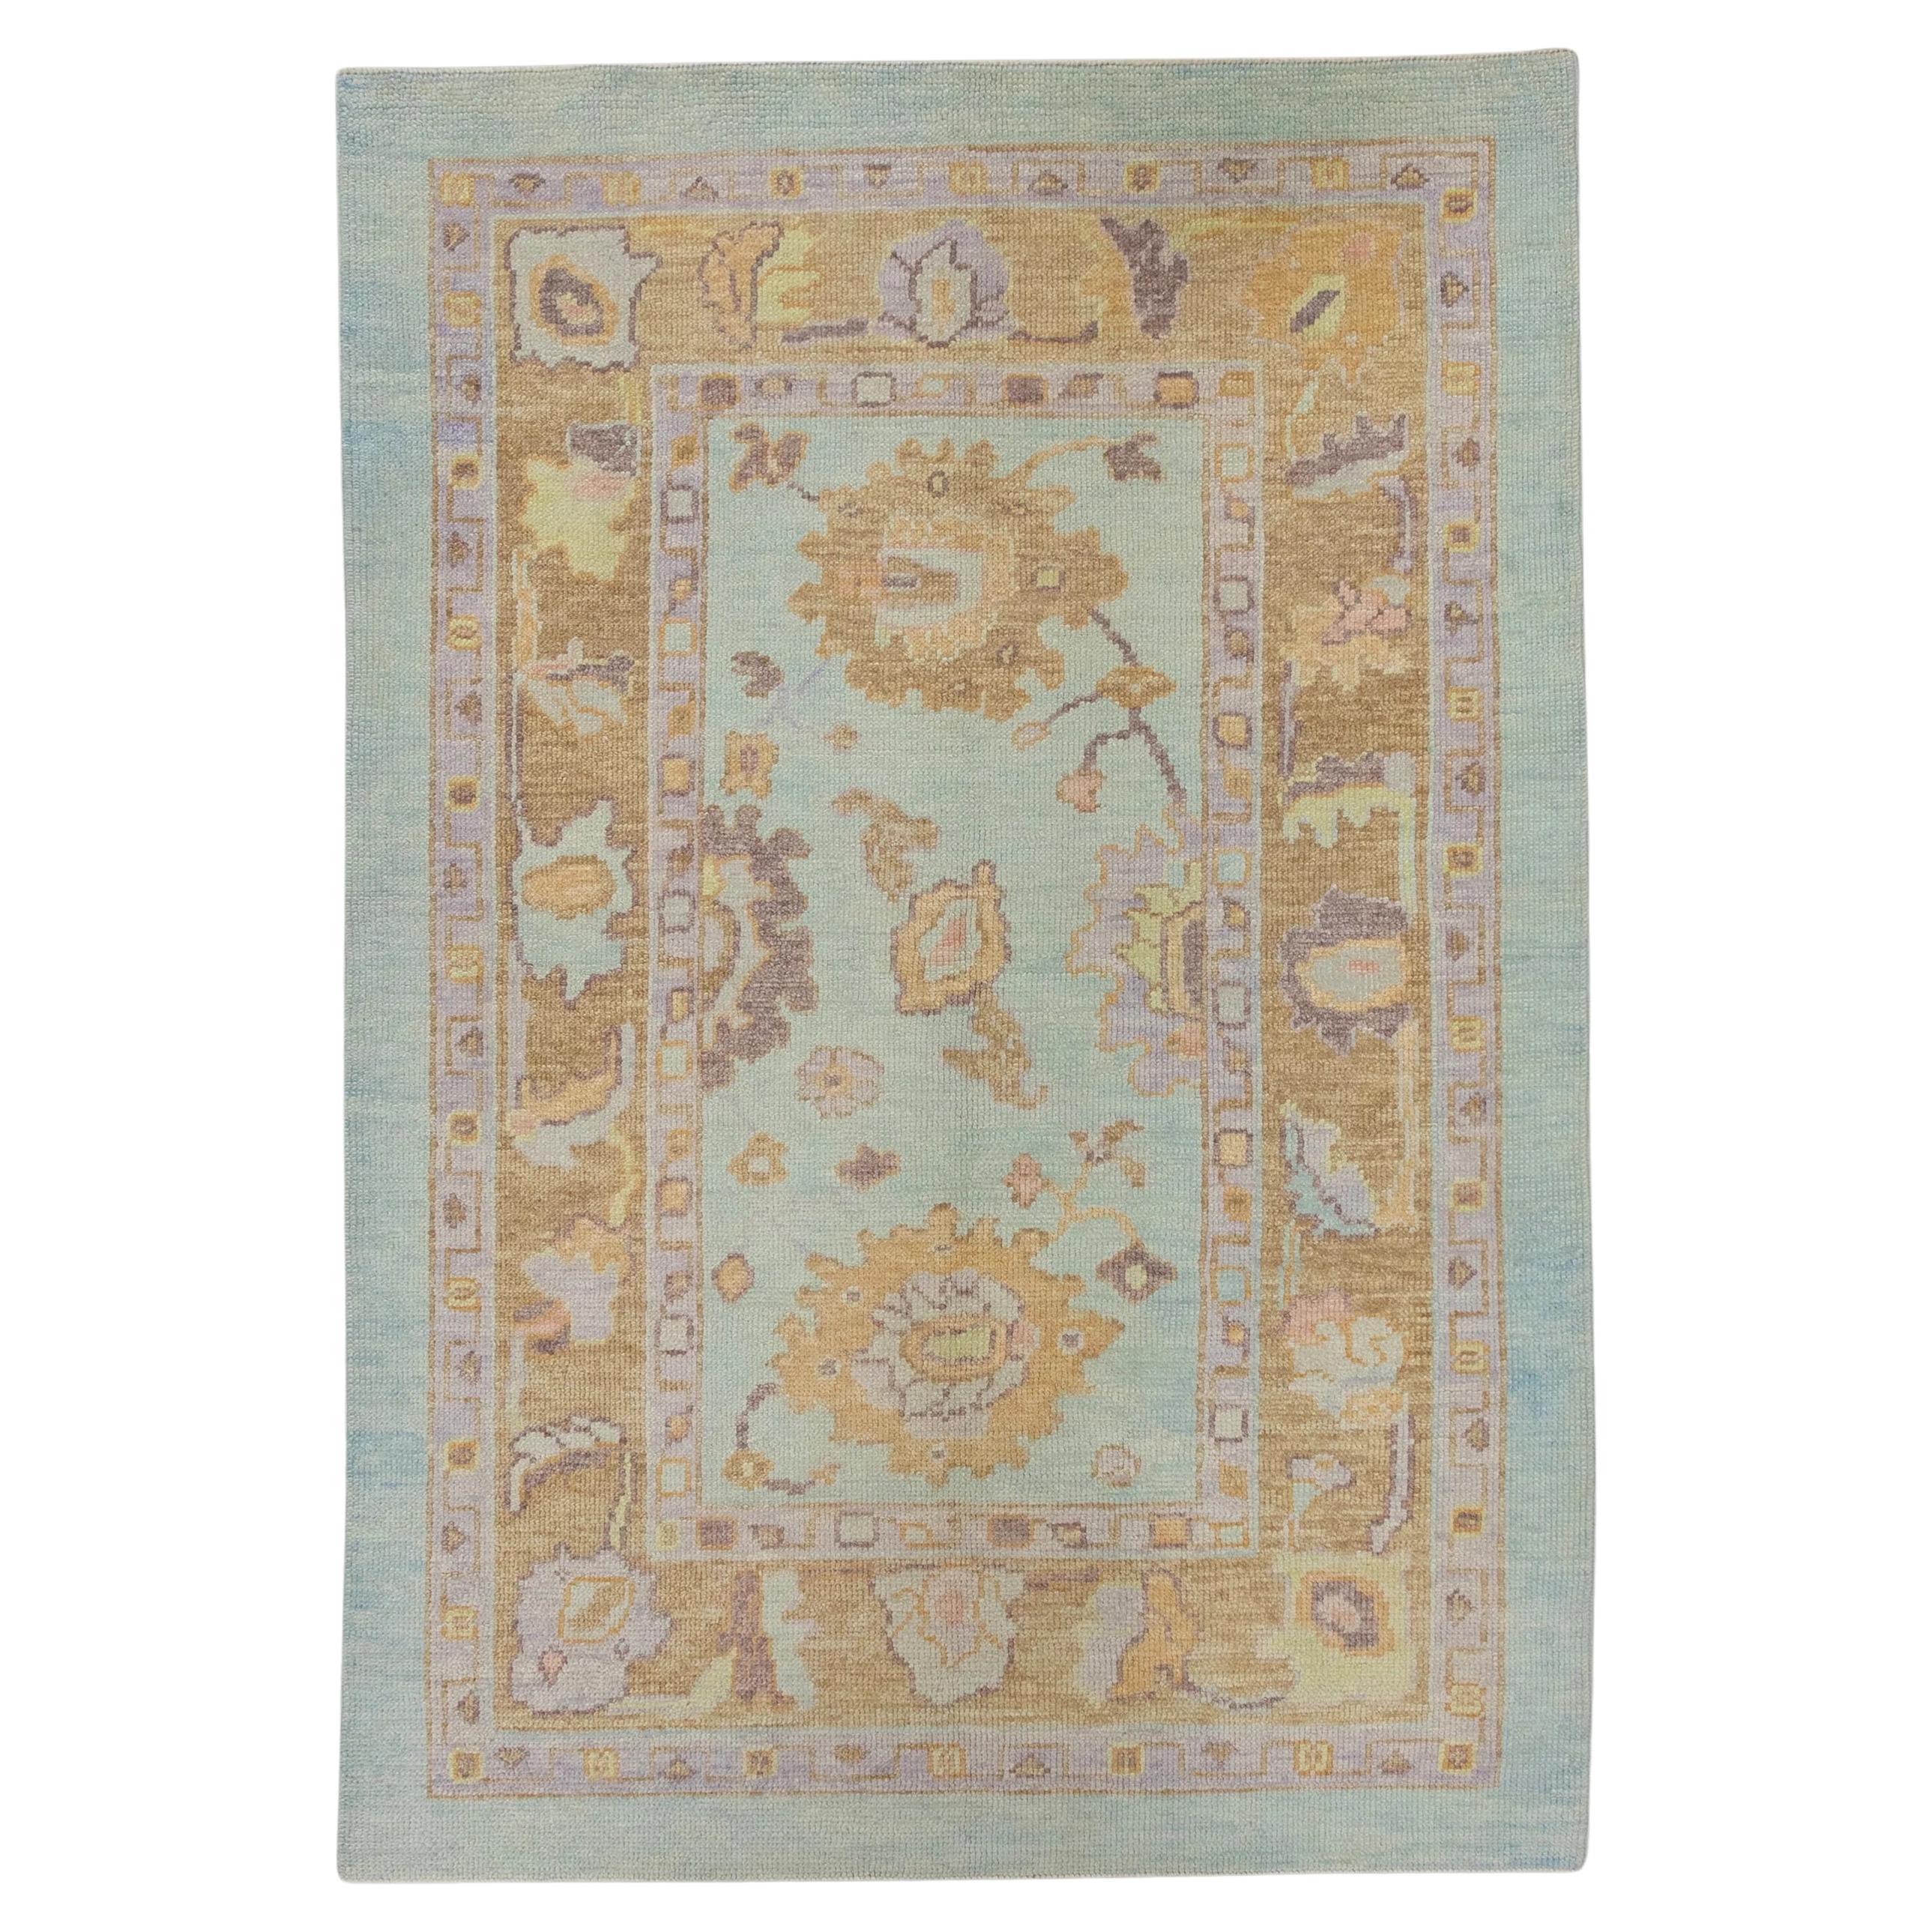 Blue and Pink Floral Handwoven Wool Turkish Oushak Rug 4'1" x 6'1"